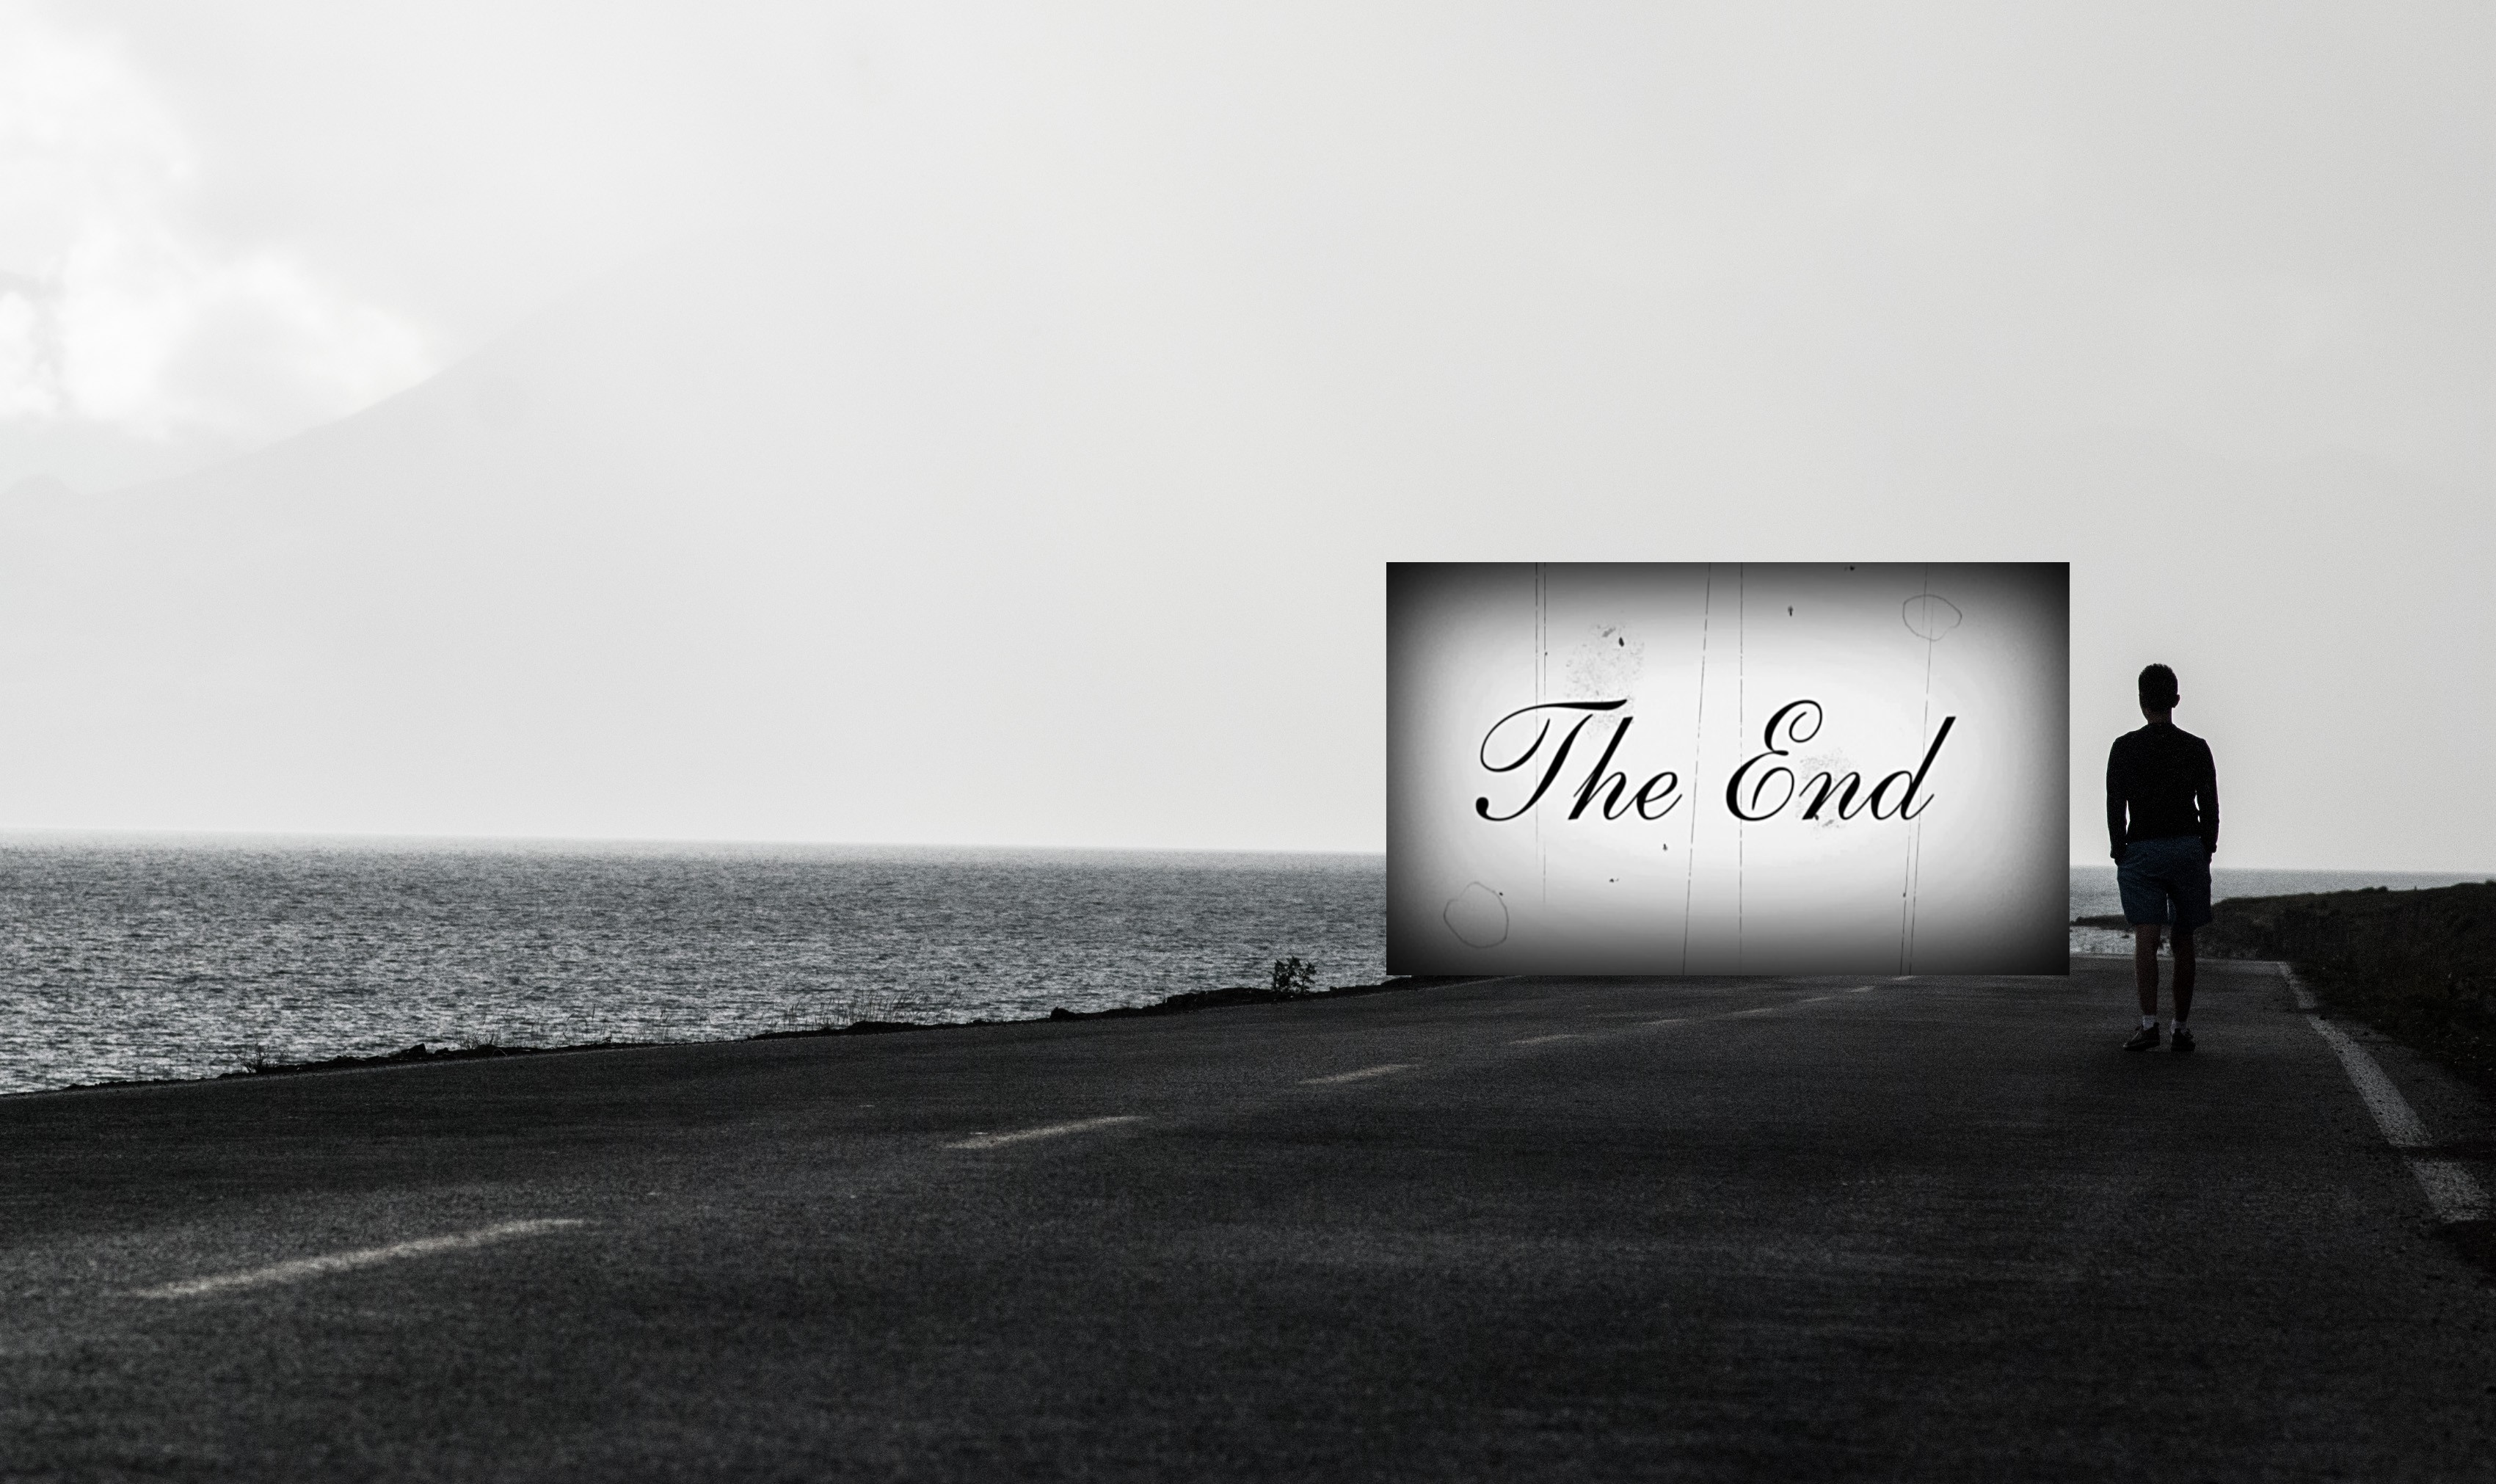 A black and white photo of a person in running clothes standing on a road beside the ocean with a big, digital screen that reads "The End" in front of the person